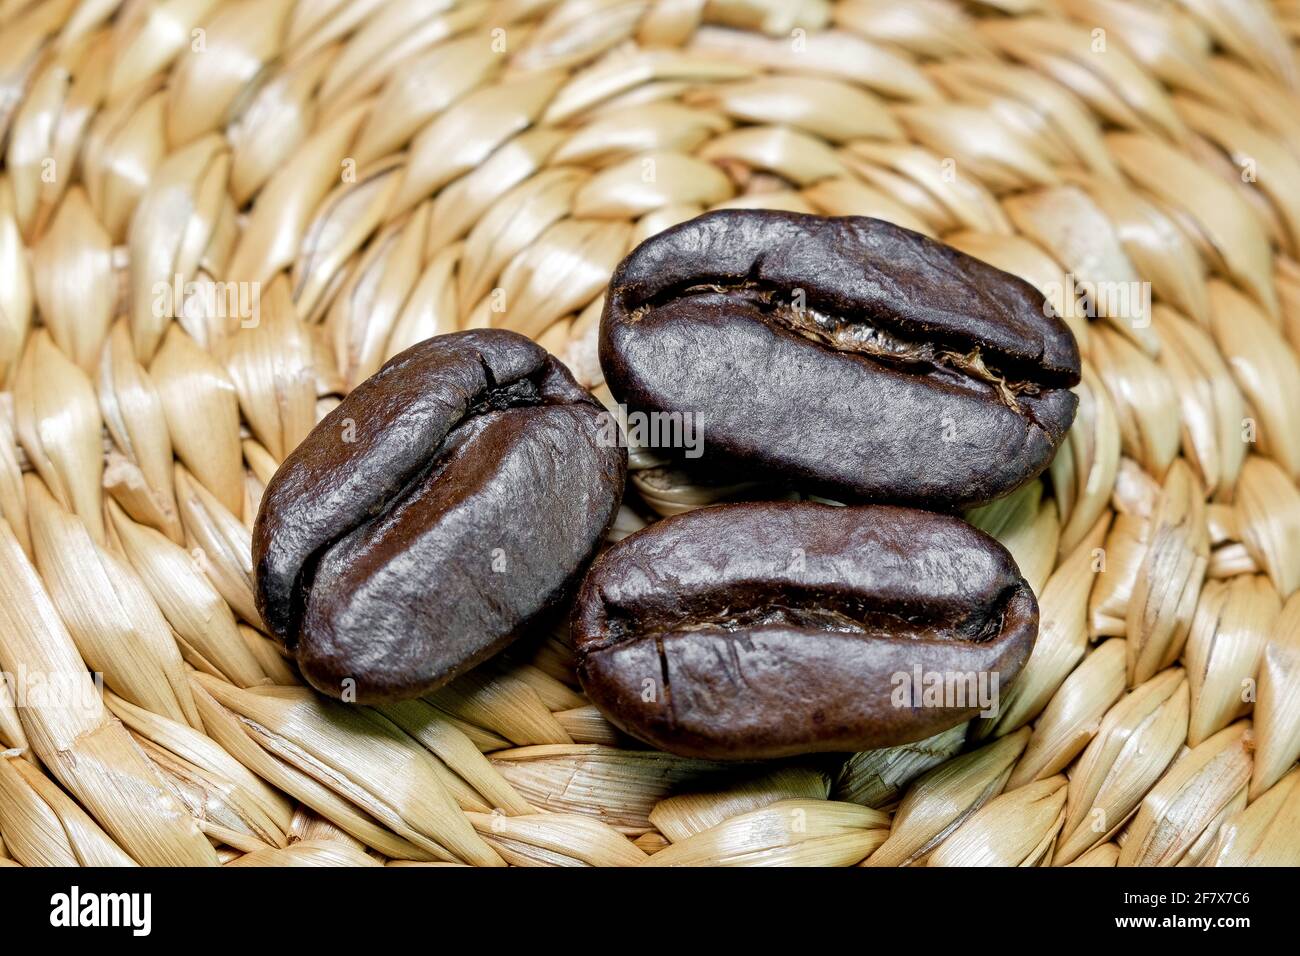 black coffee grains on a braided background photographed close-up Stock Photo